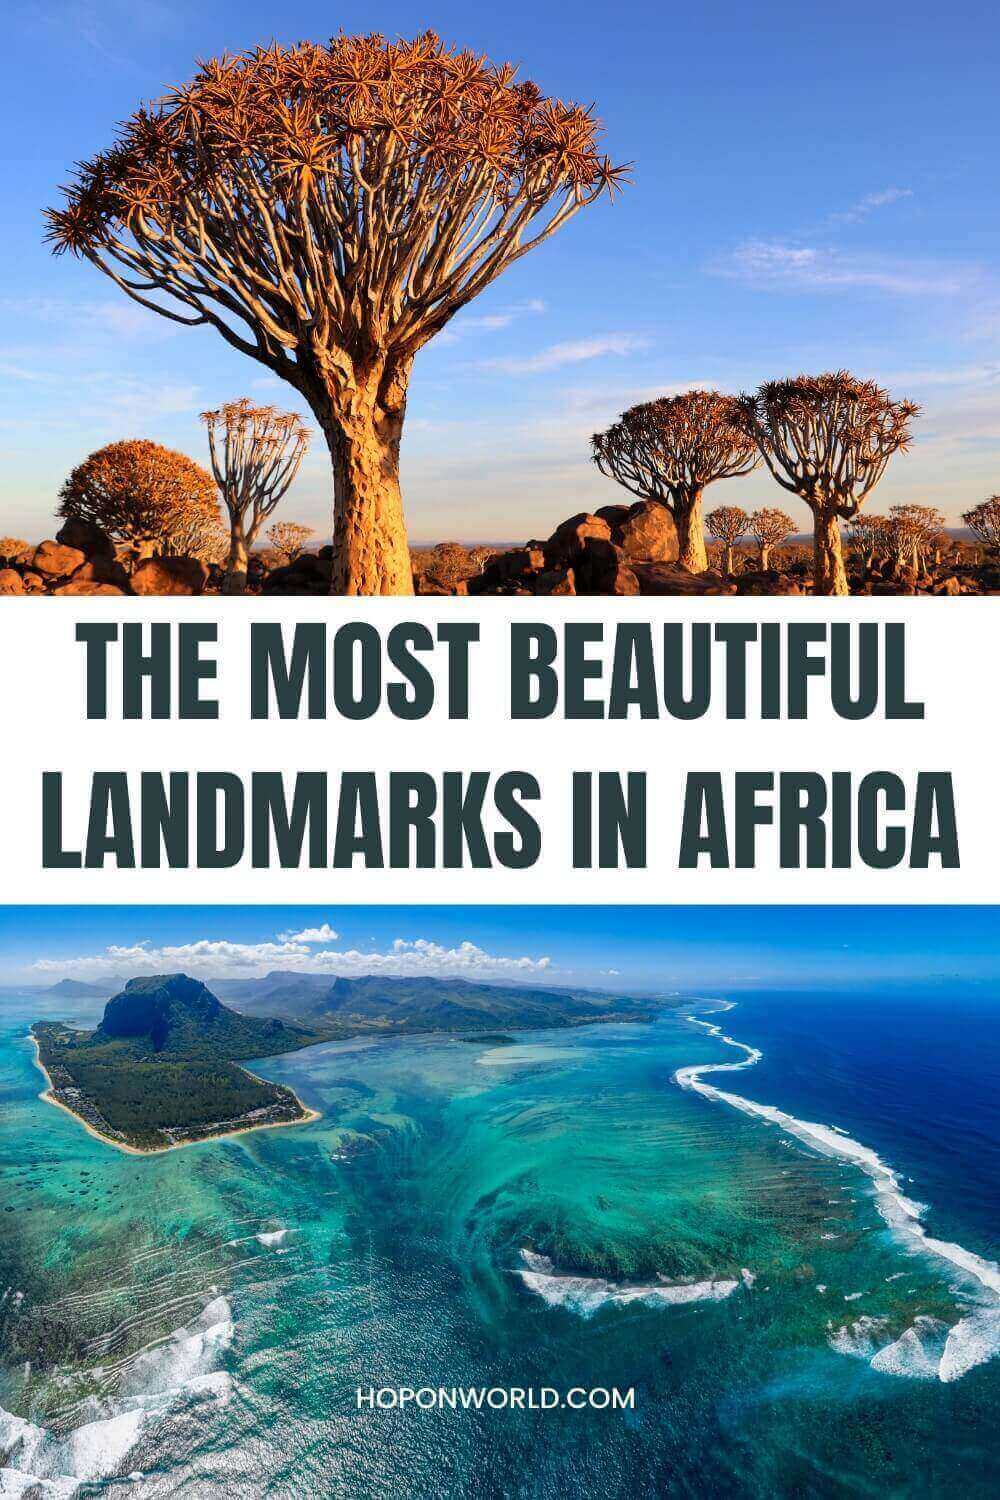 Africa is chock-full with some of the most incredible landmarks in the world! From ancient historical sites to gorgeous natural wonders to fascinating monuments - Africa has it all! Here's our list of the very best landmarks in Africa not to miss! landmarks in Africa | famous African landmarks | best places to go in Africa